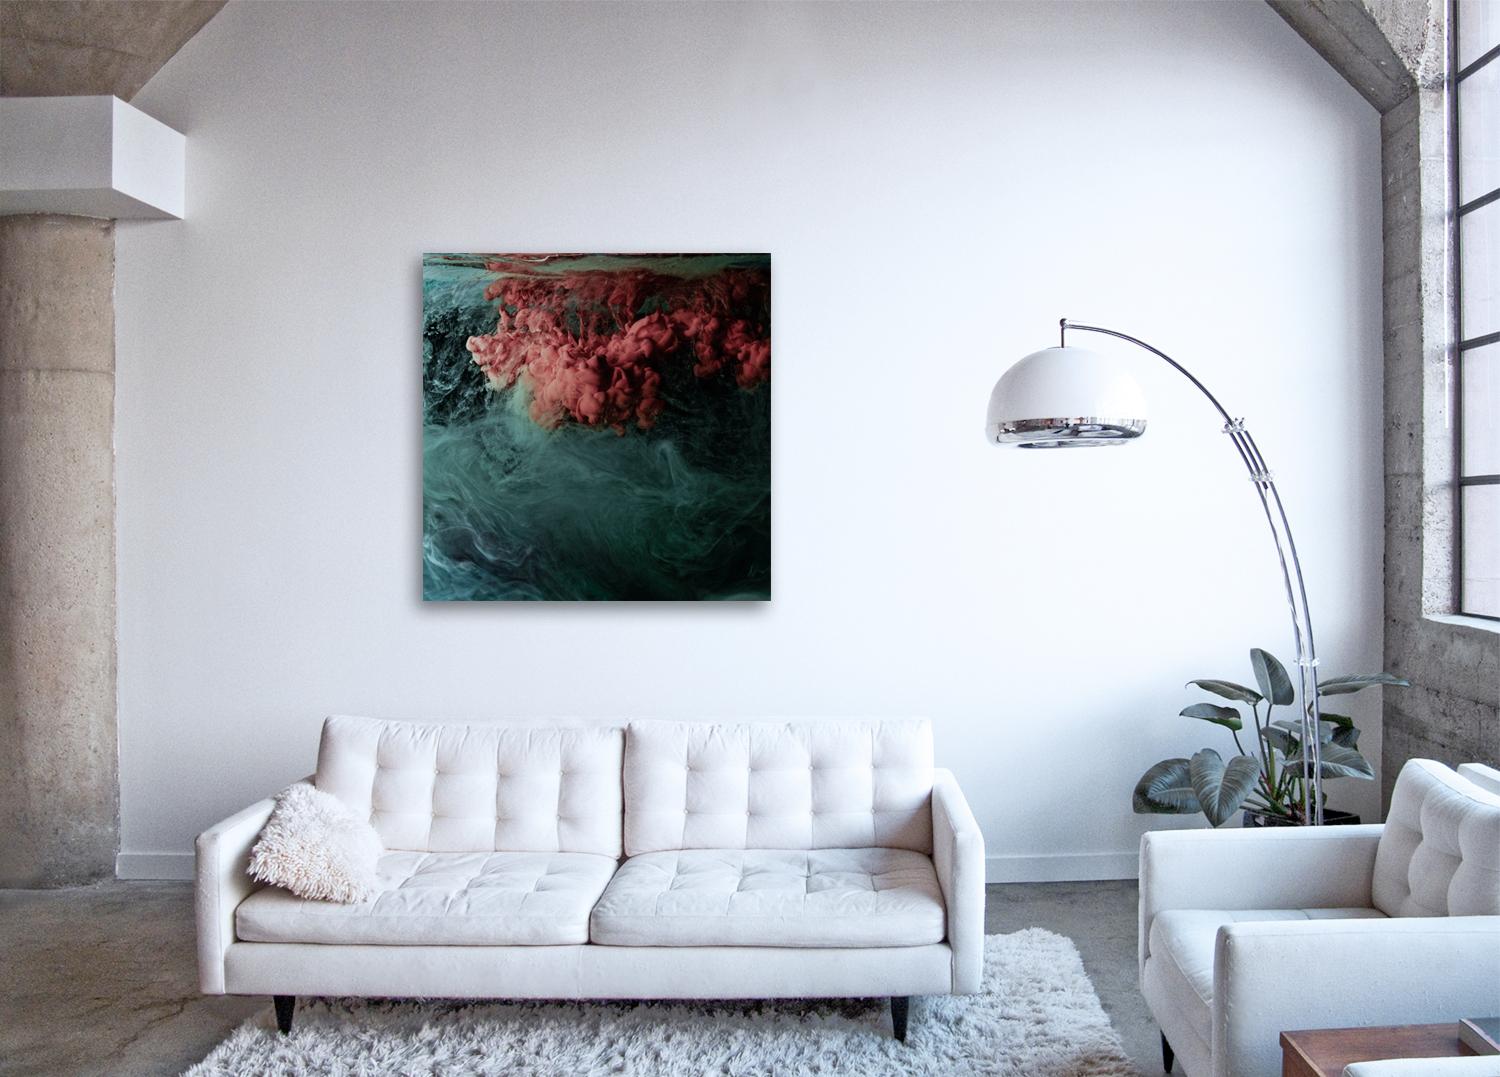 Stratosphere IV (framed) - large photograph of abstract liquid water cloudscape - Photograph by Christian Stoll